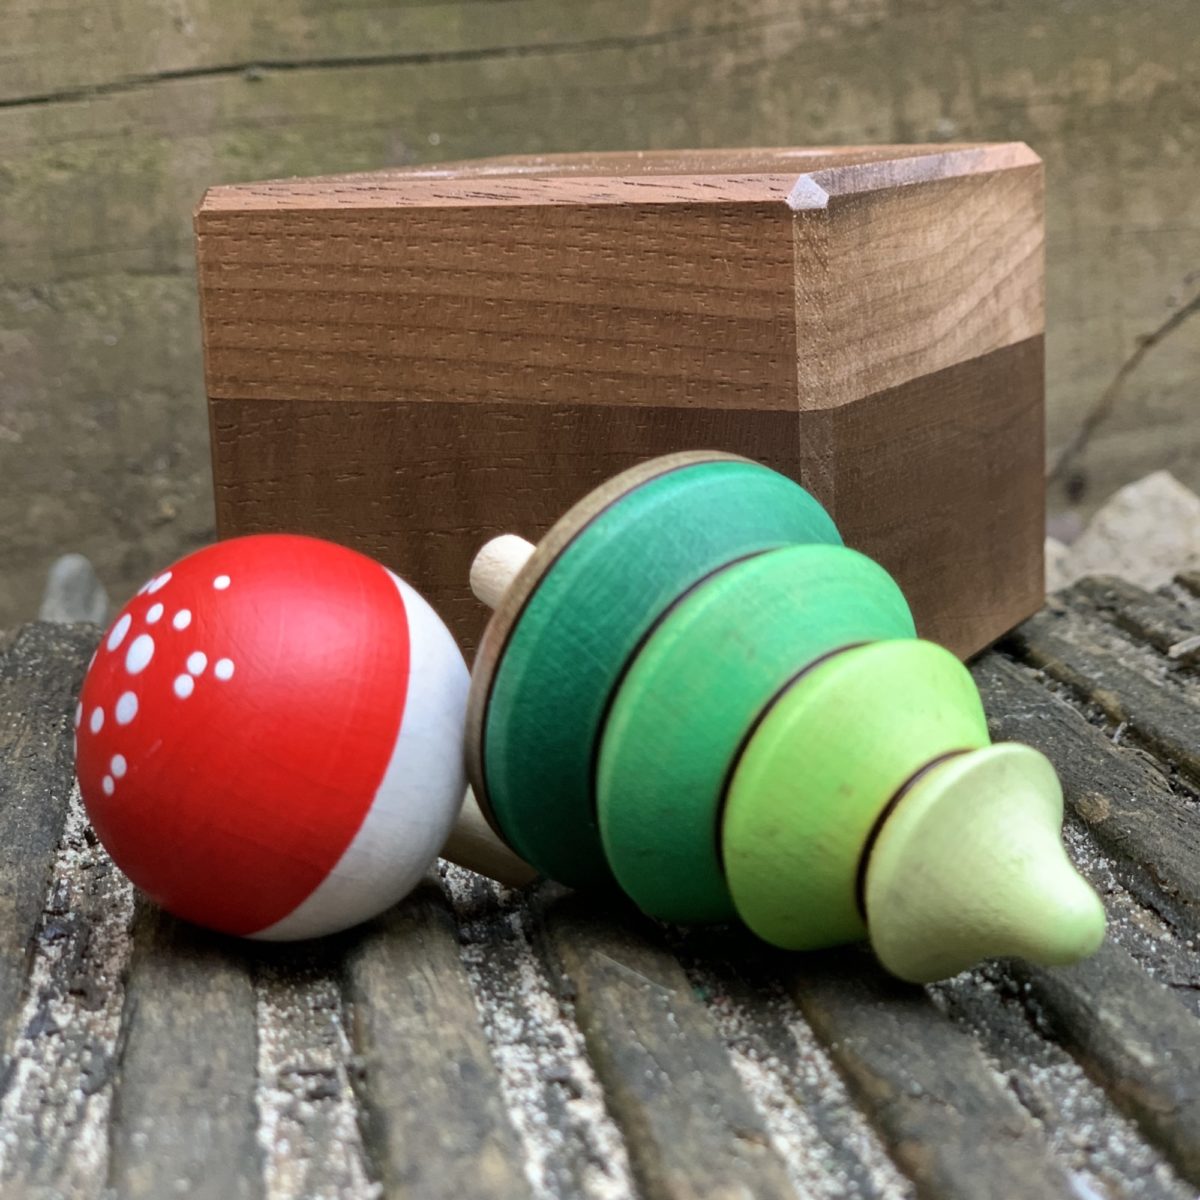 Mader Woodland Music Box with Spinning Tops | Toy | Mader Kreiselmanufaktur | Little Acorn to Mighty Oaks